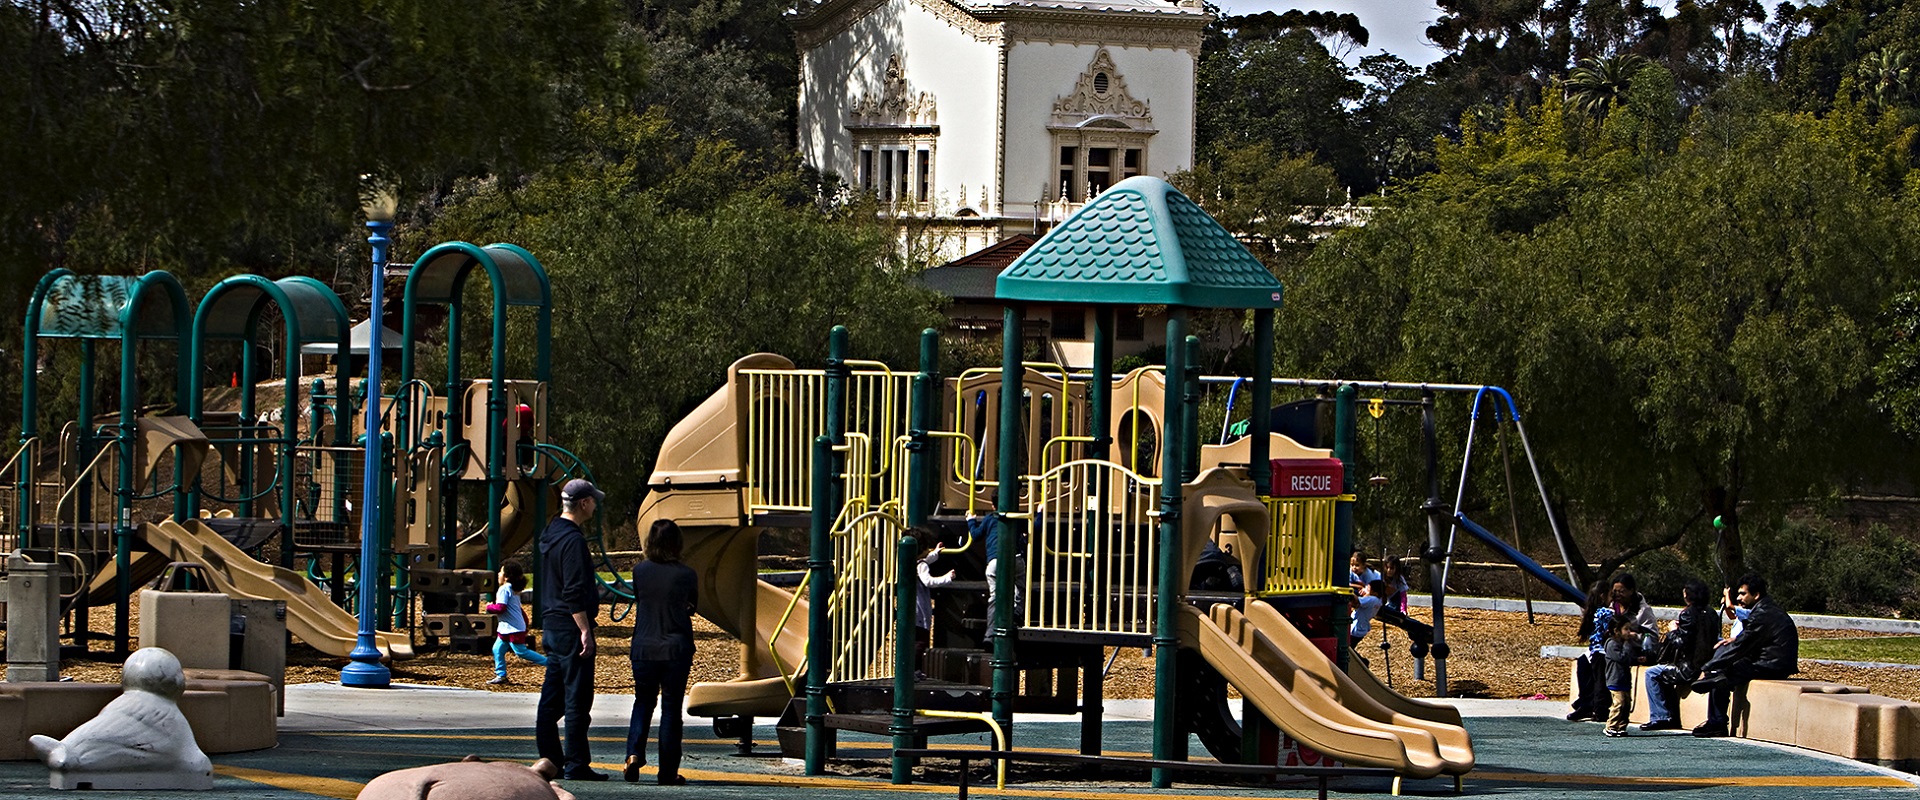 Pepper Grove playground where children are playing on large colorful play structures, slides, and swings.